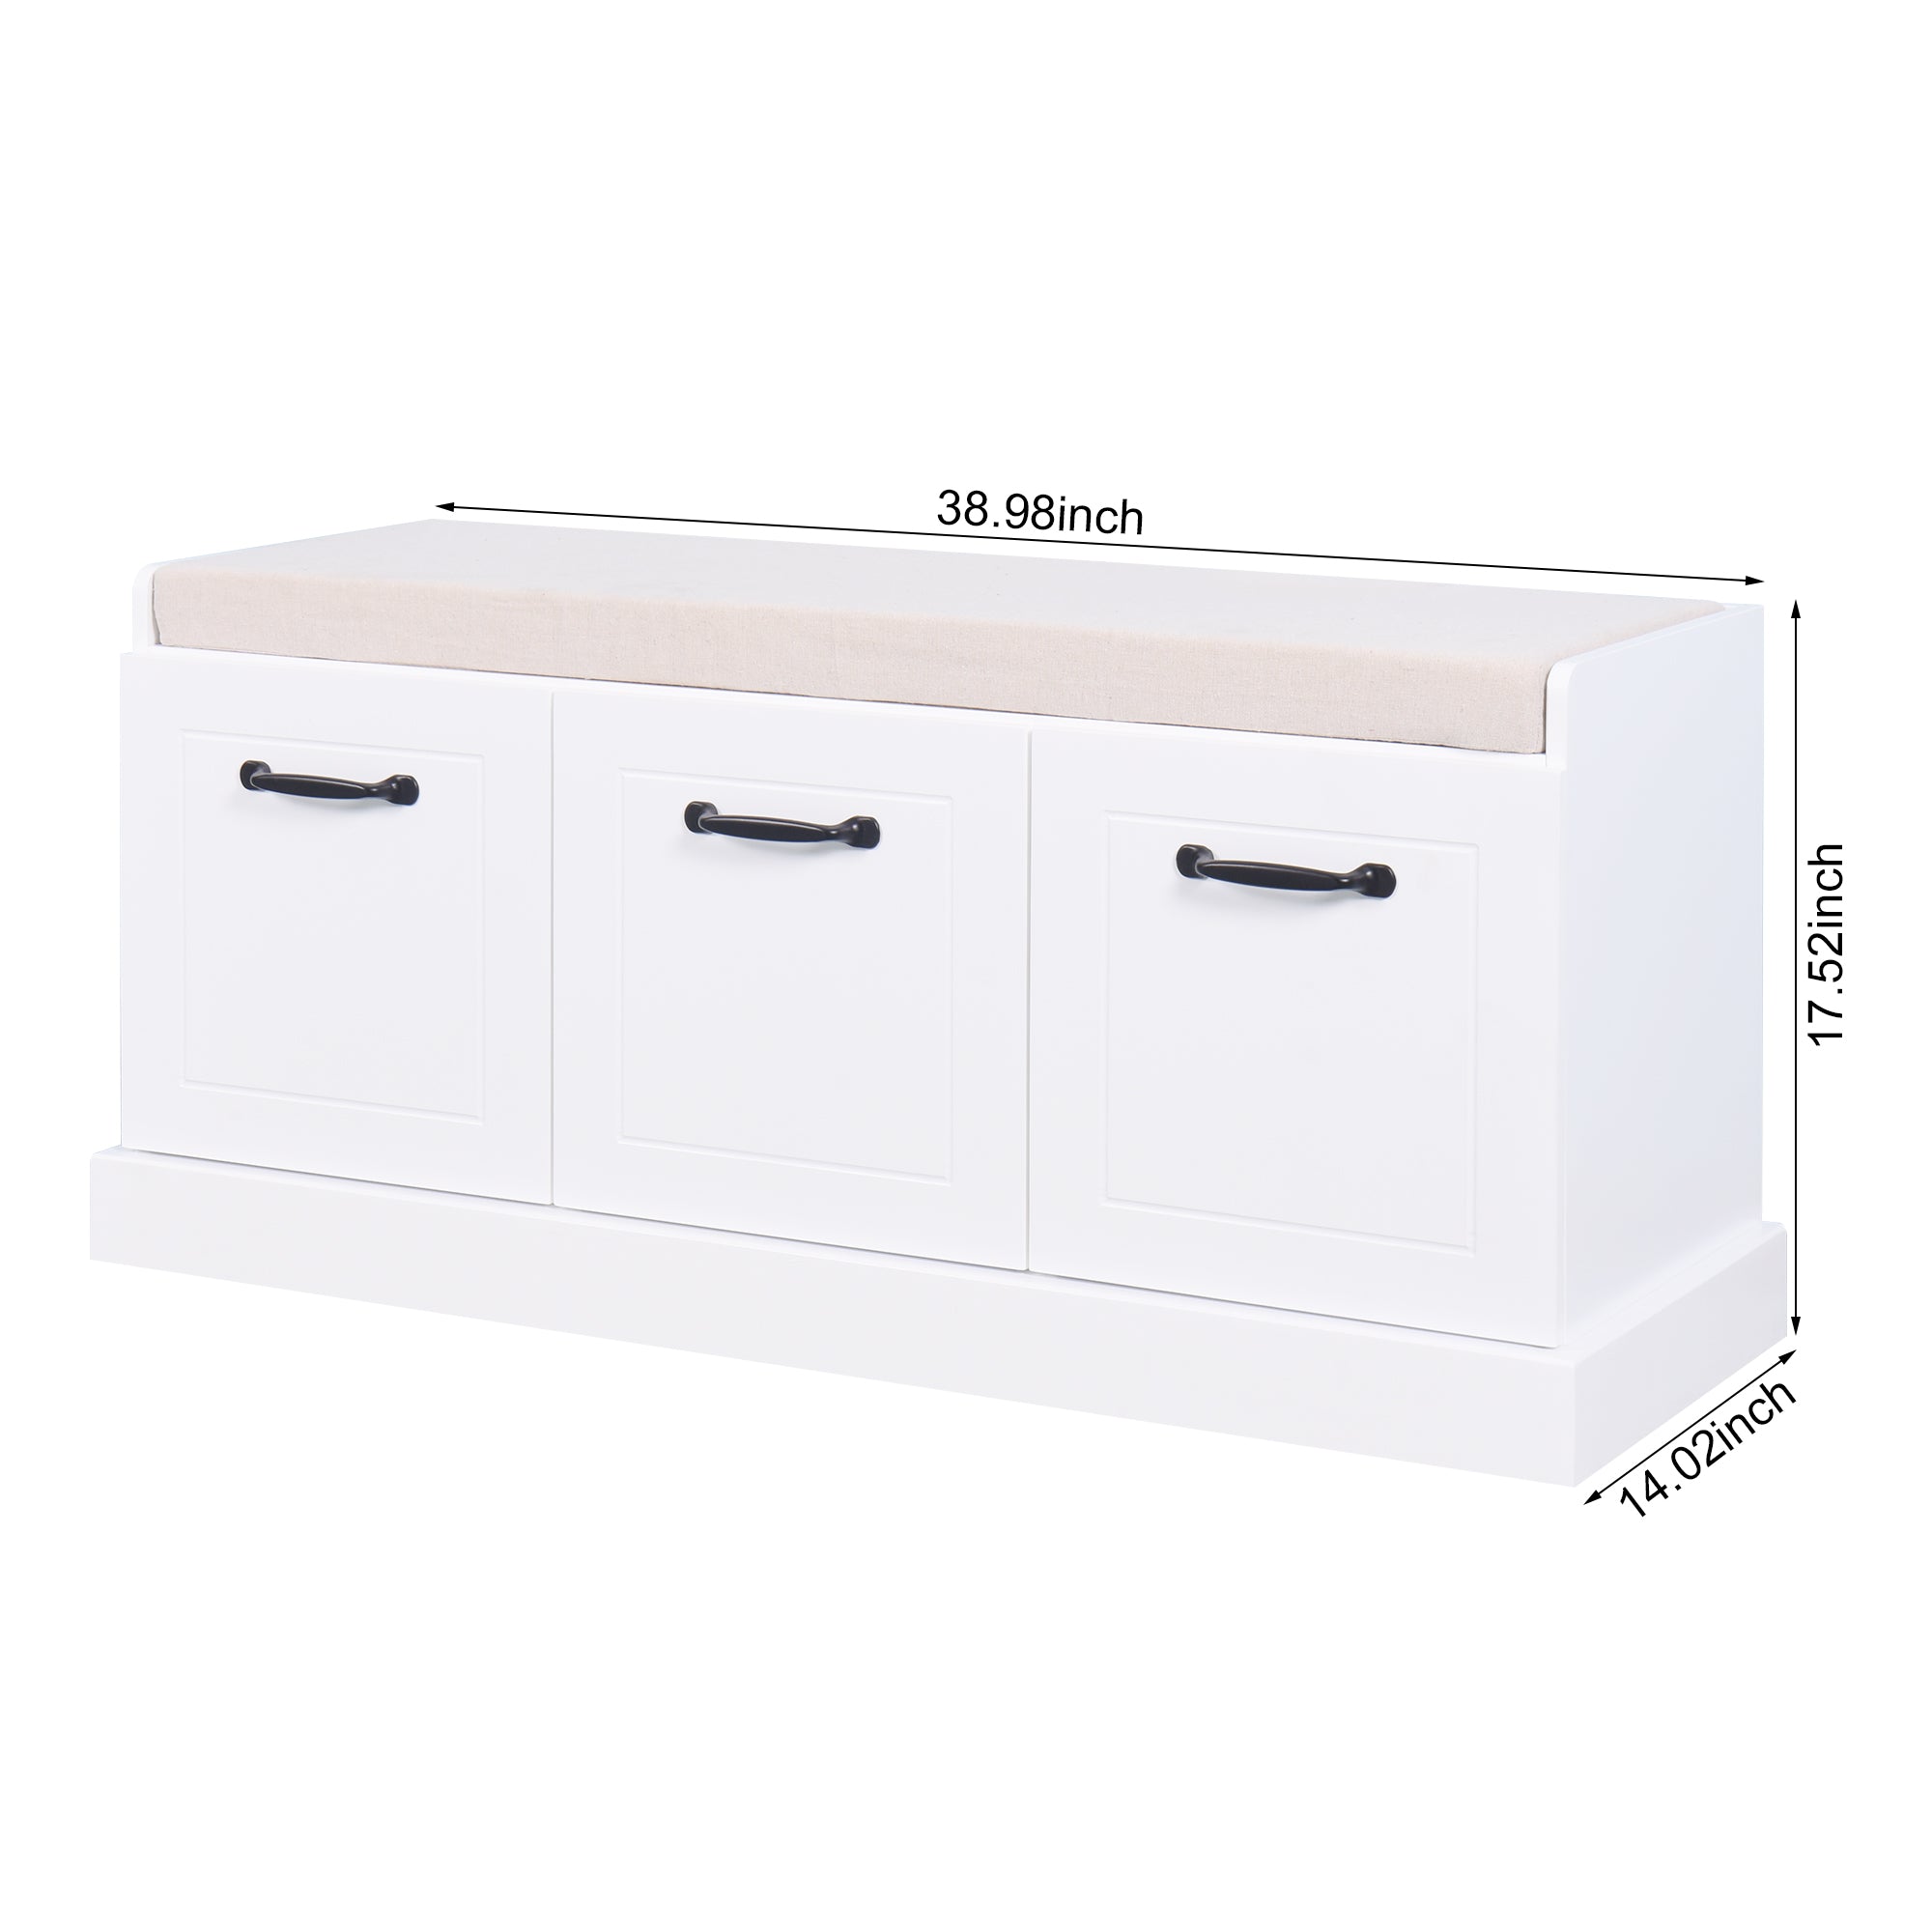 ZNTS Wooden Entryway Shoe Cabinet Living Room Storage Bench with White Cushion W40953989